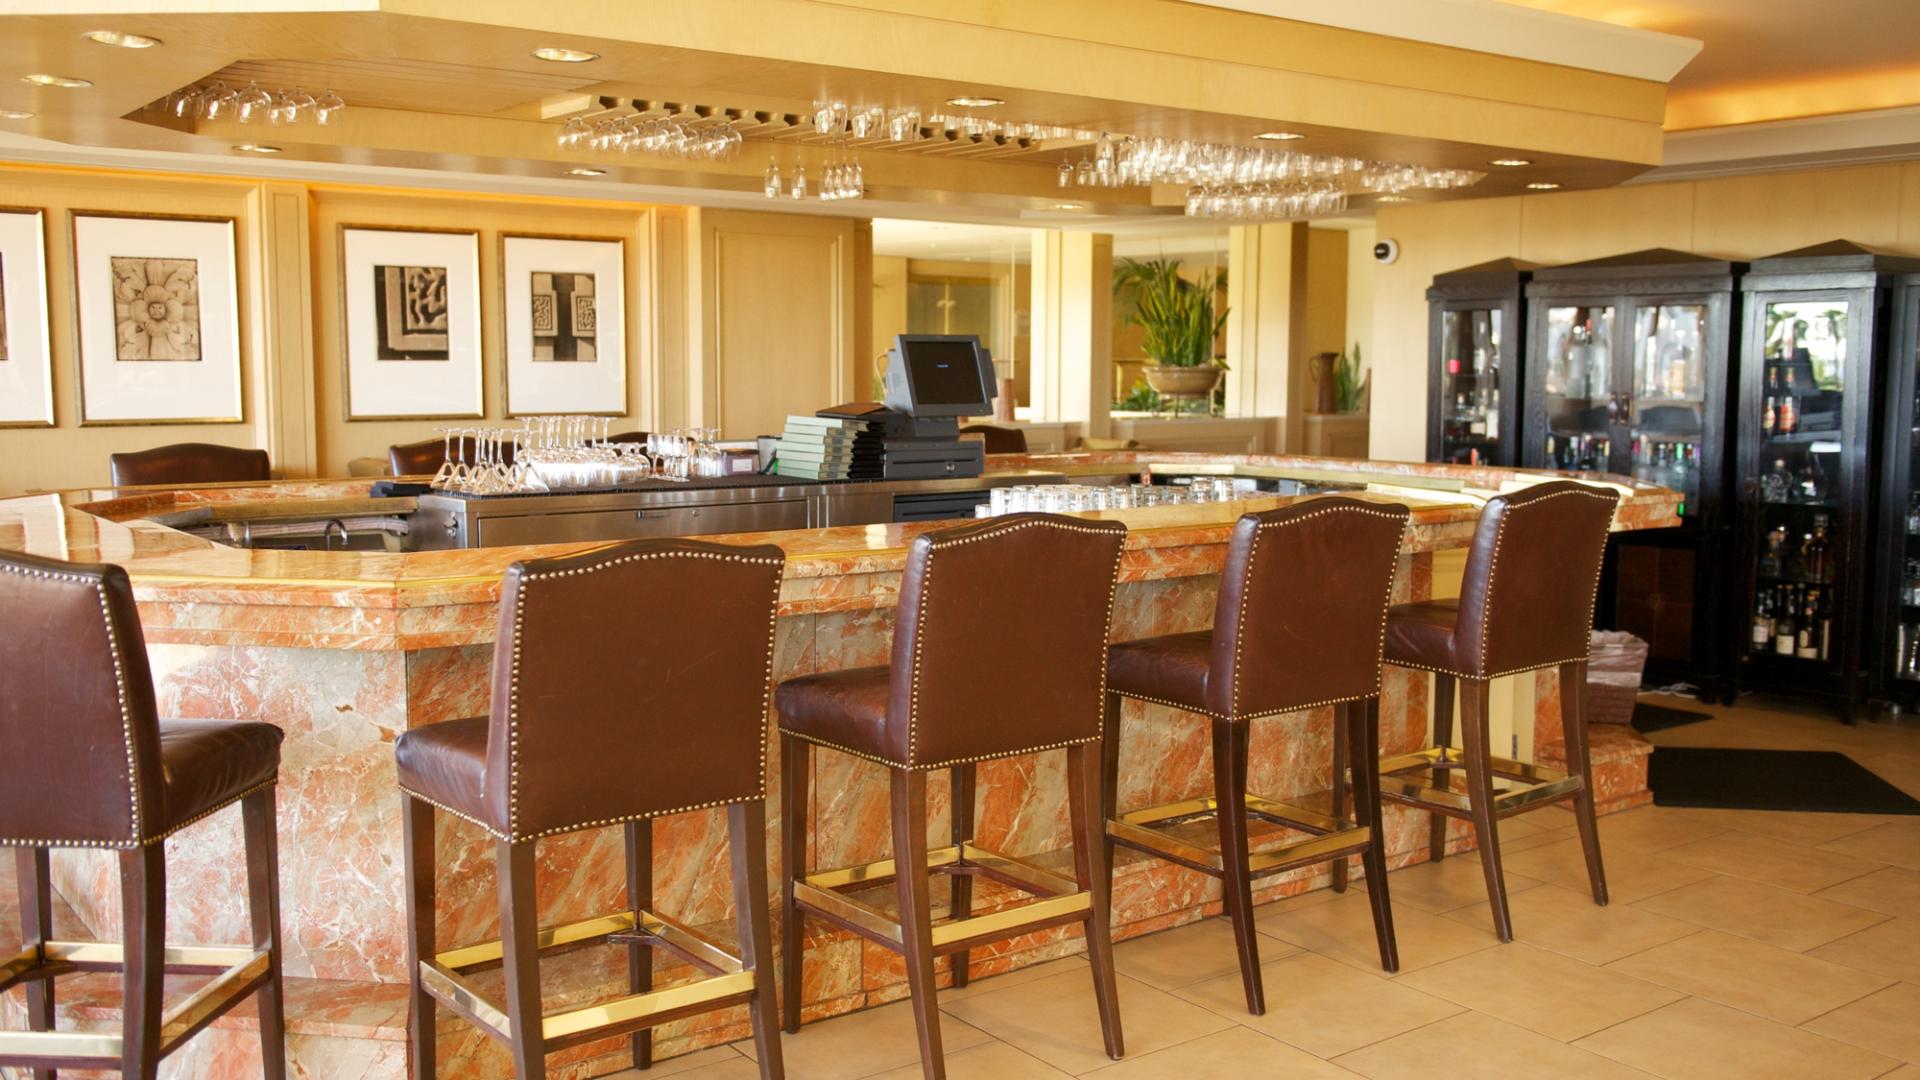 Bachelor Party Venues for Rent in Washington, DC